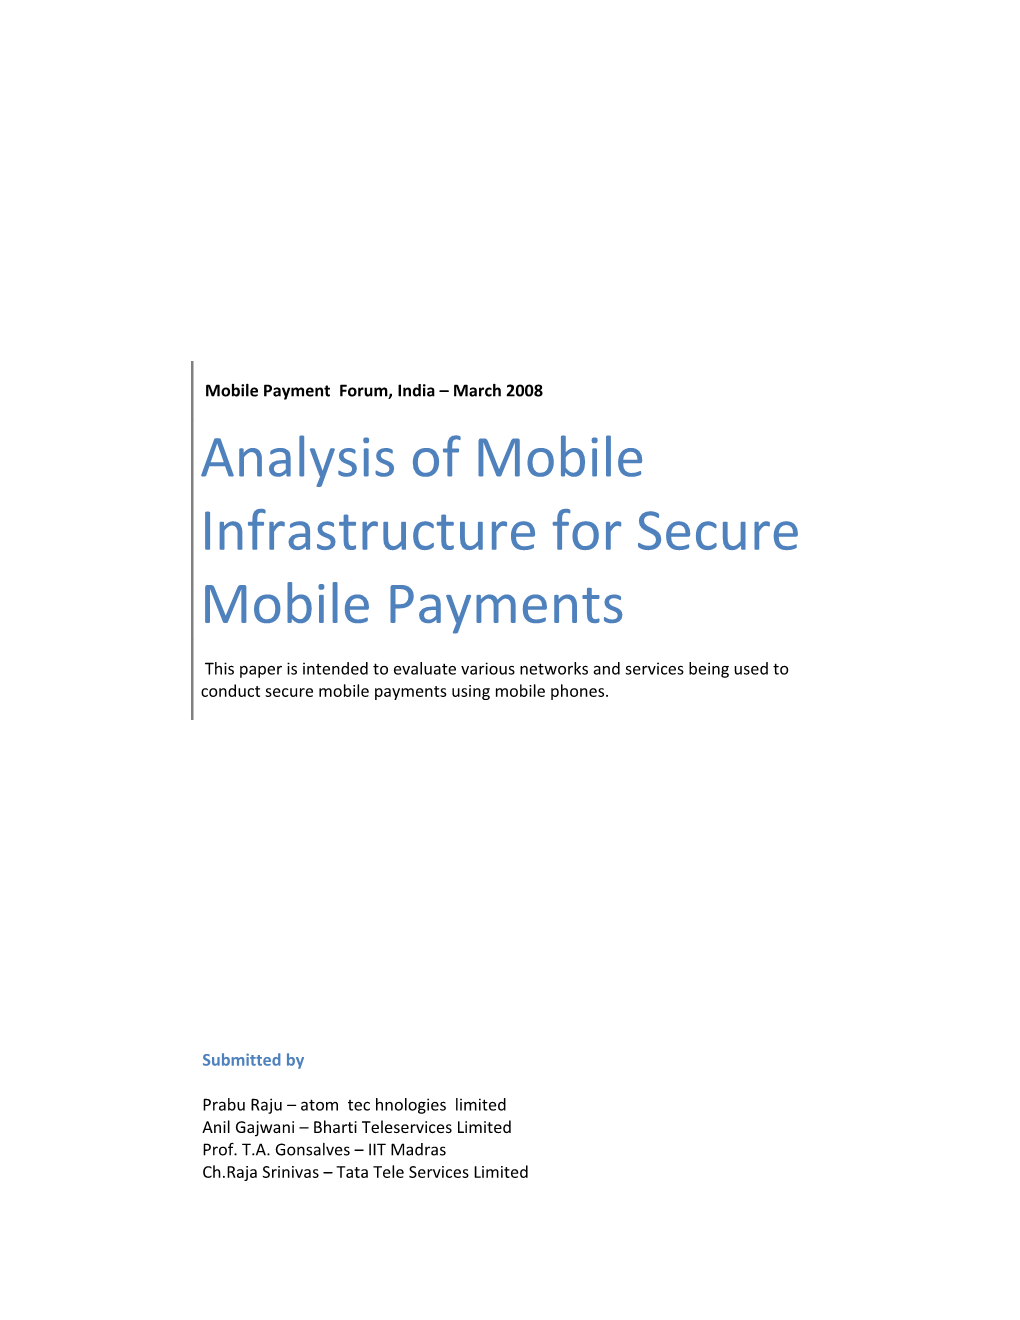 Analysis of Mobile Infrastructure for Secure Mobile Payments